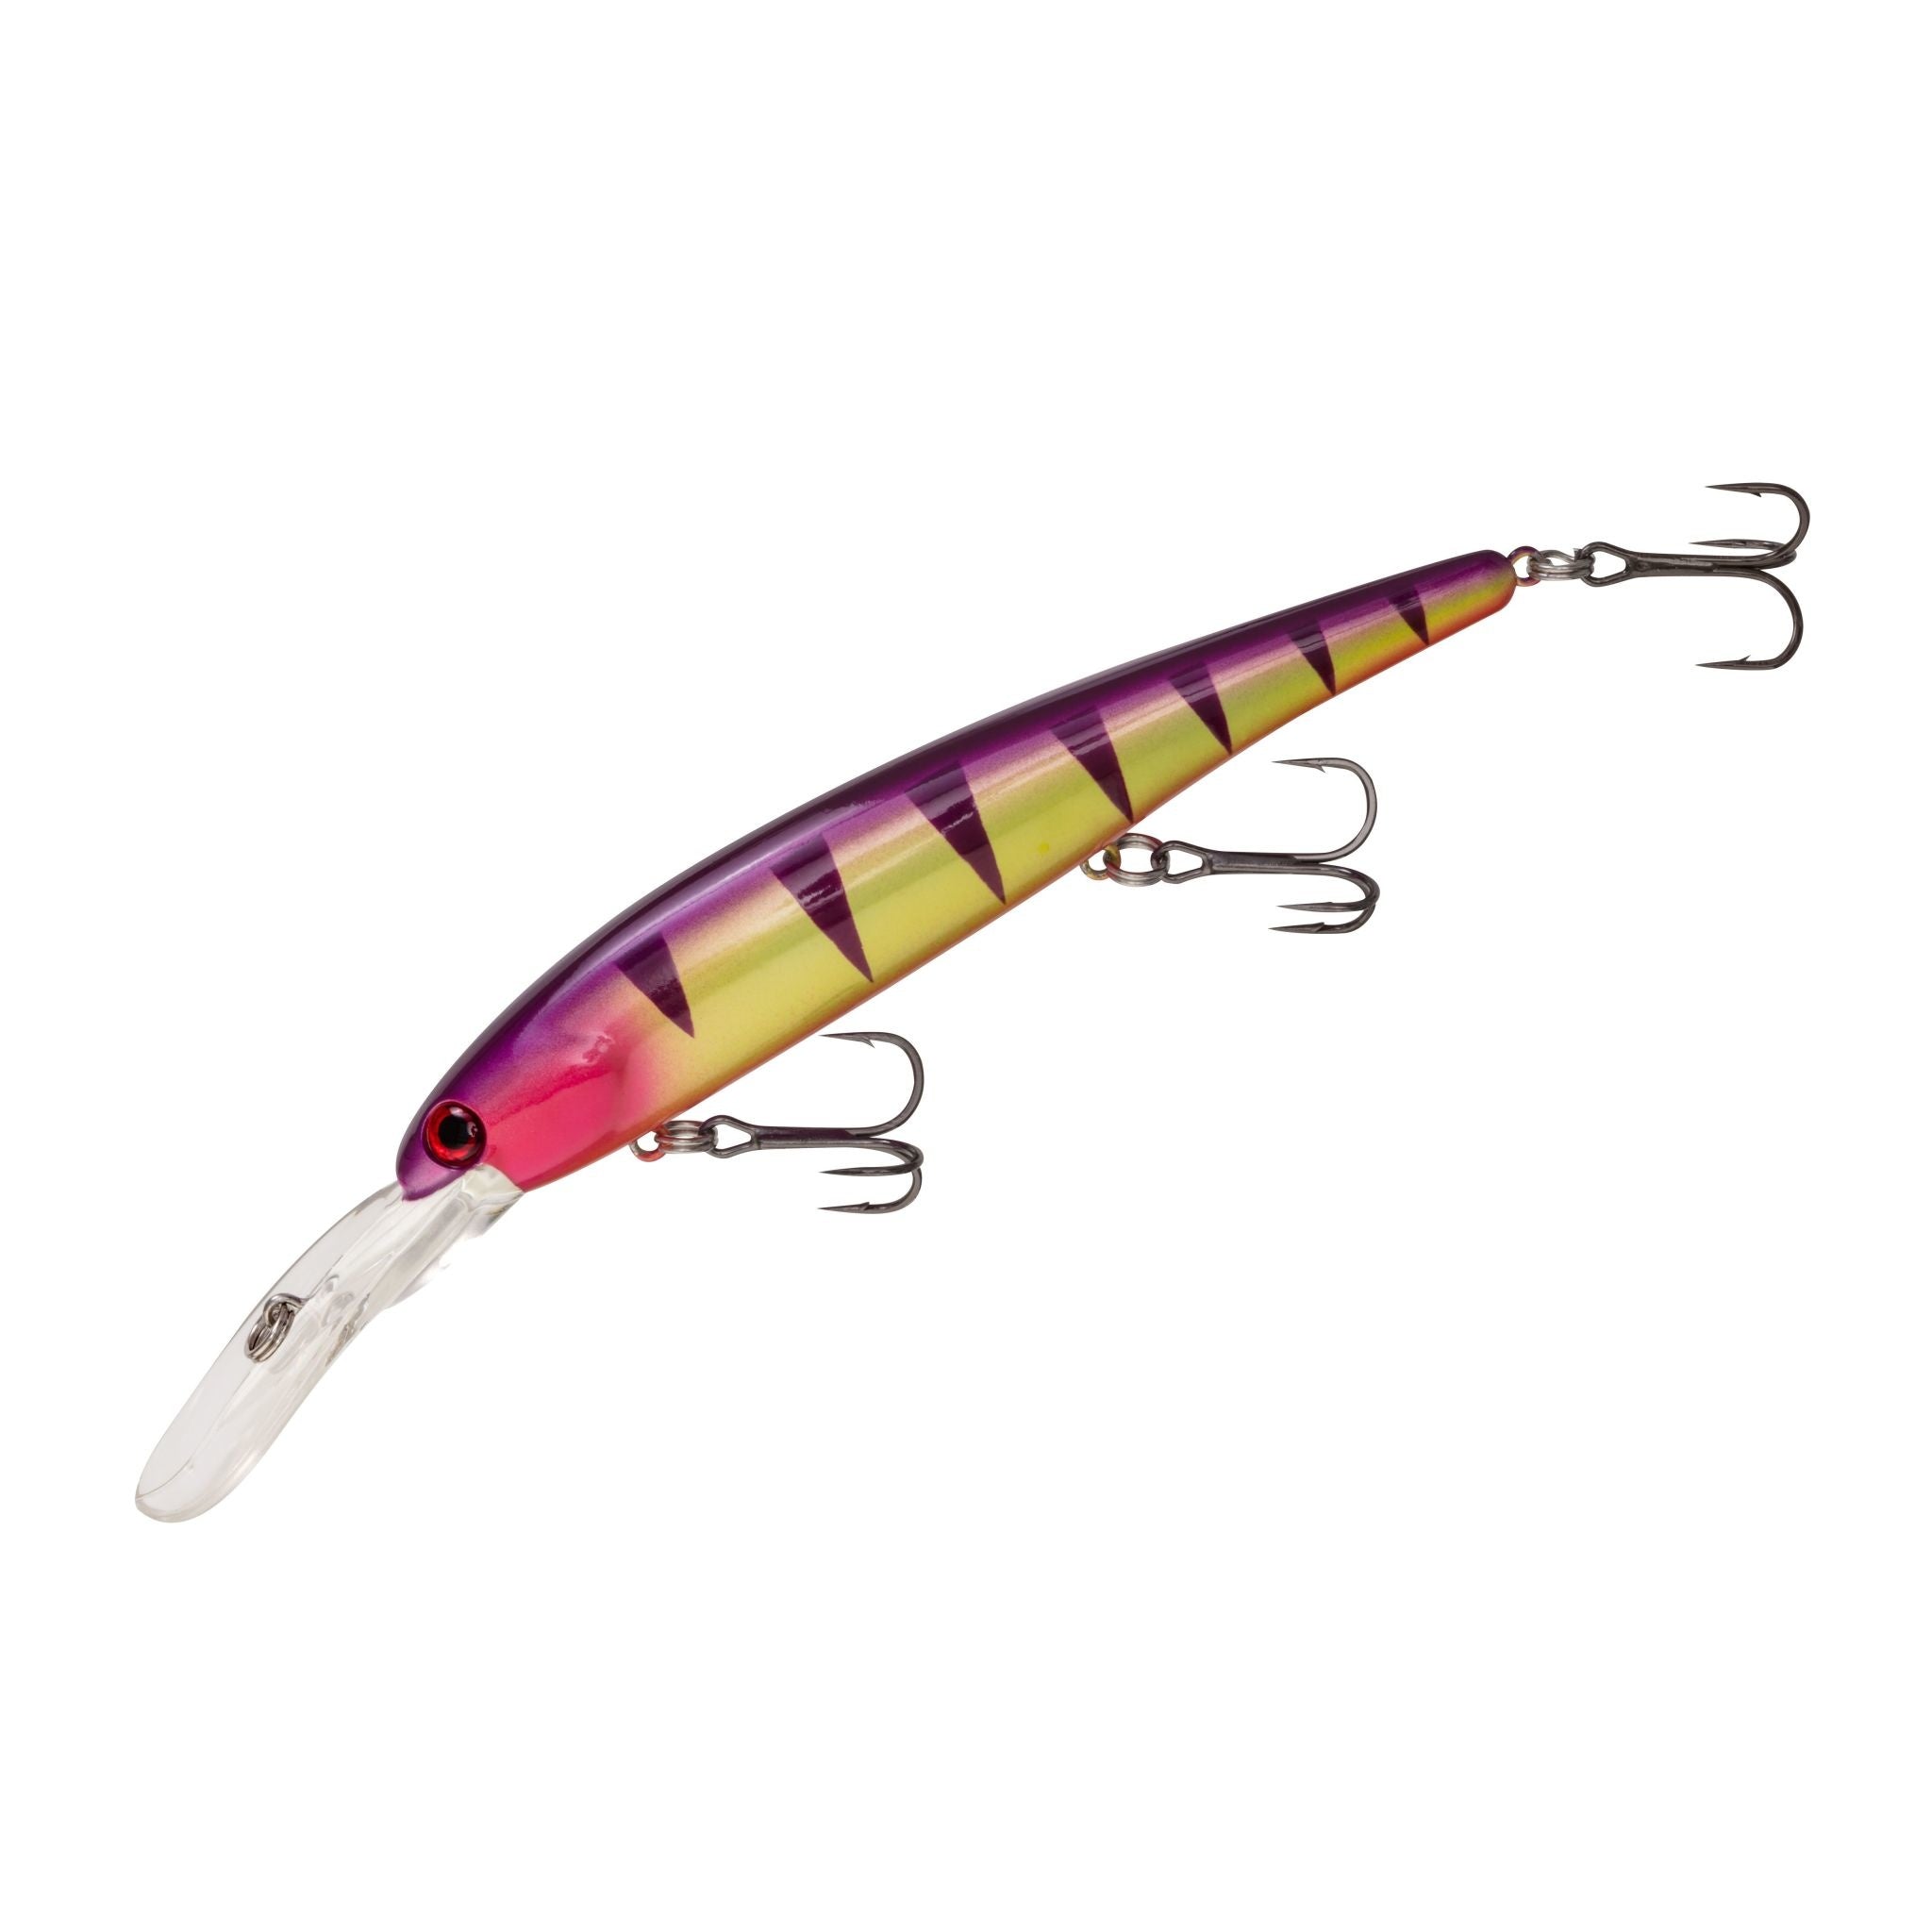 Chasebaits Curly Bait 4 inches - Mermentribe- Online Tackles Store